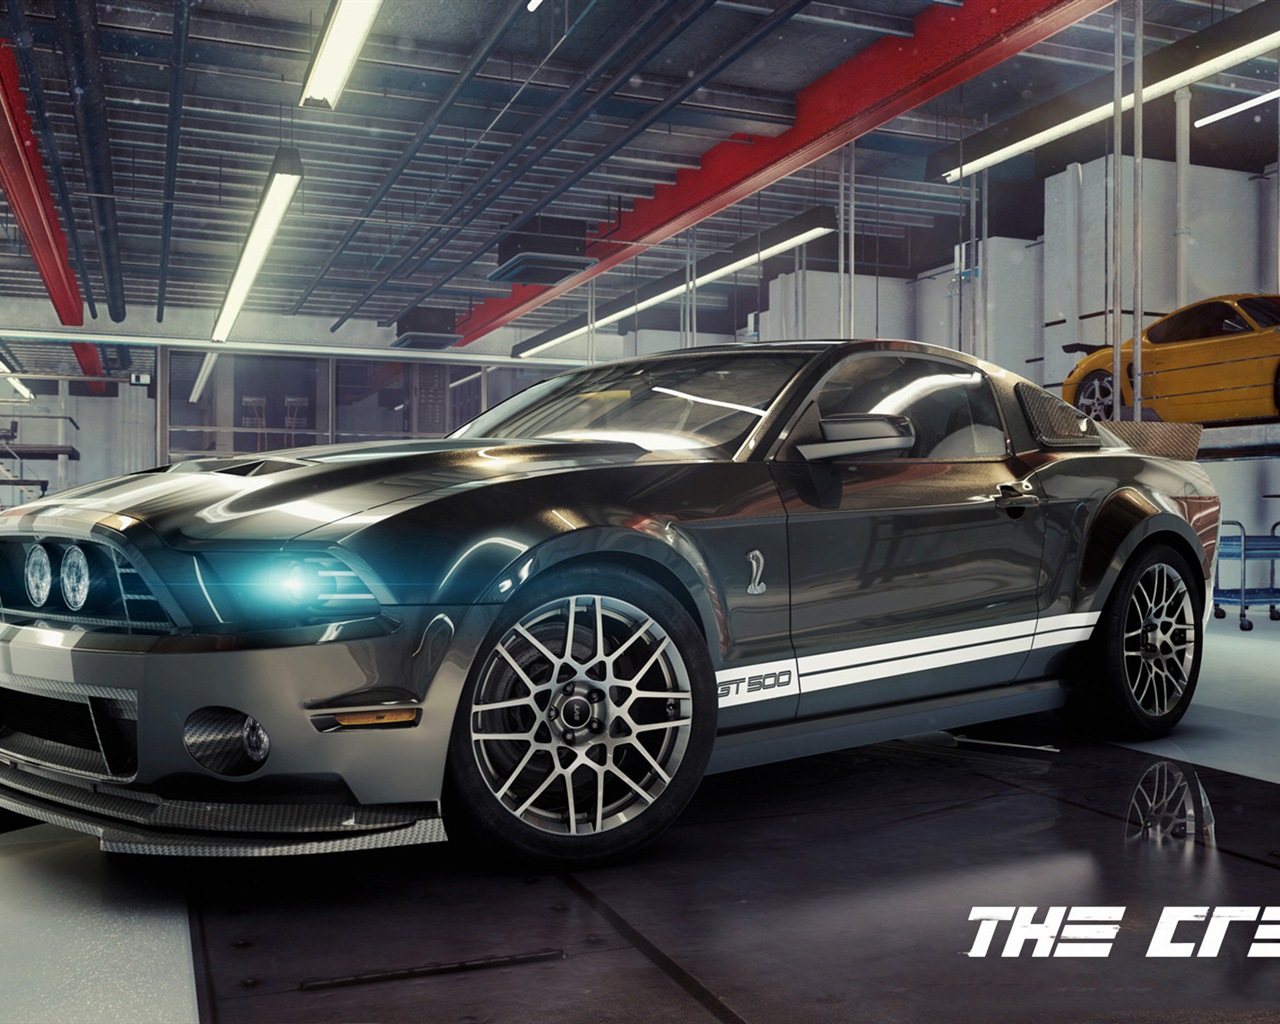 The Crew game HD wallpapers #11 - 1280x1024